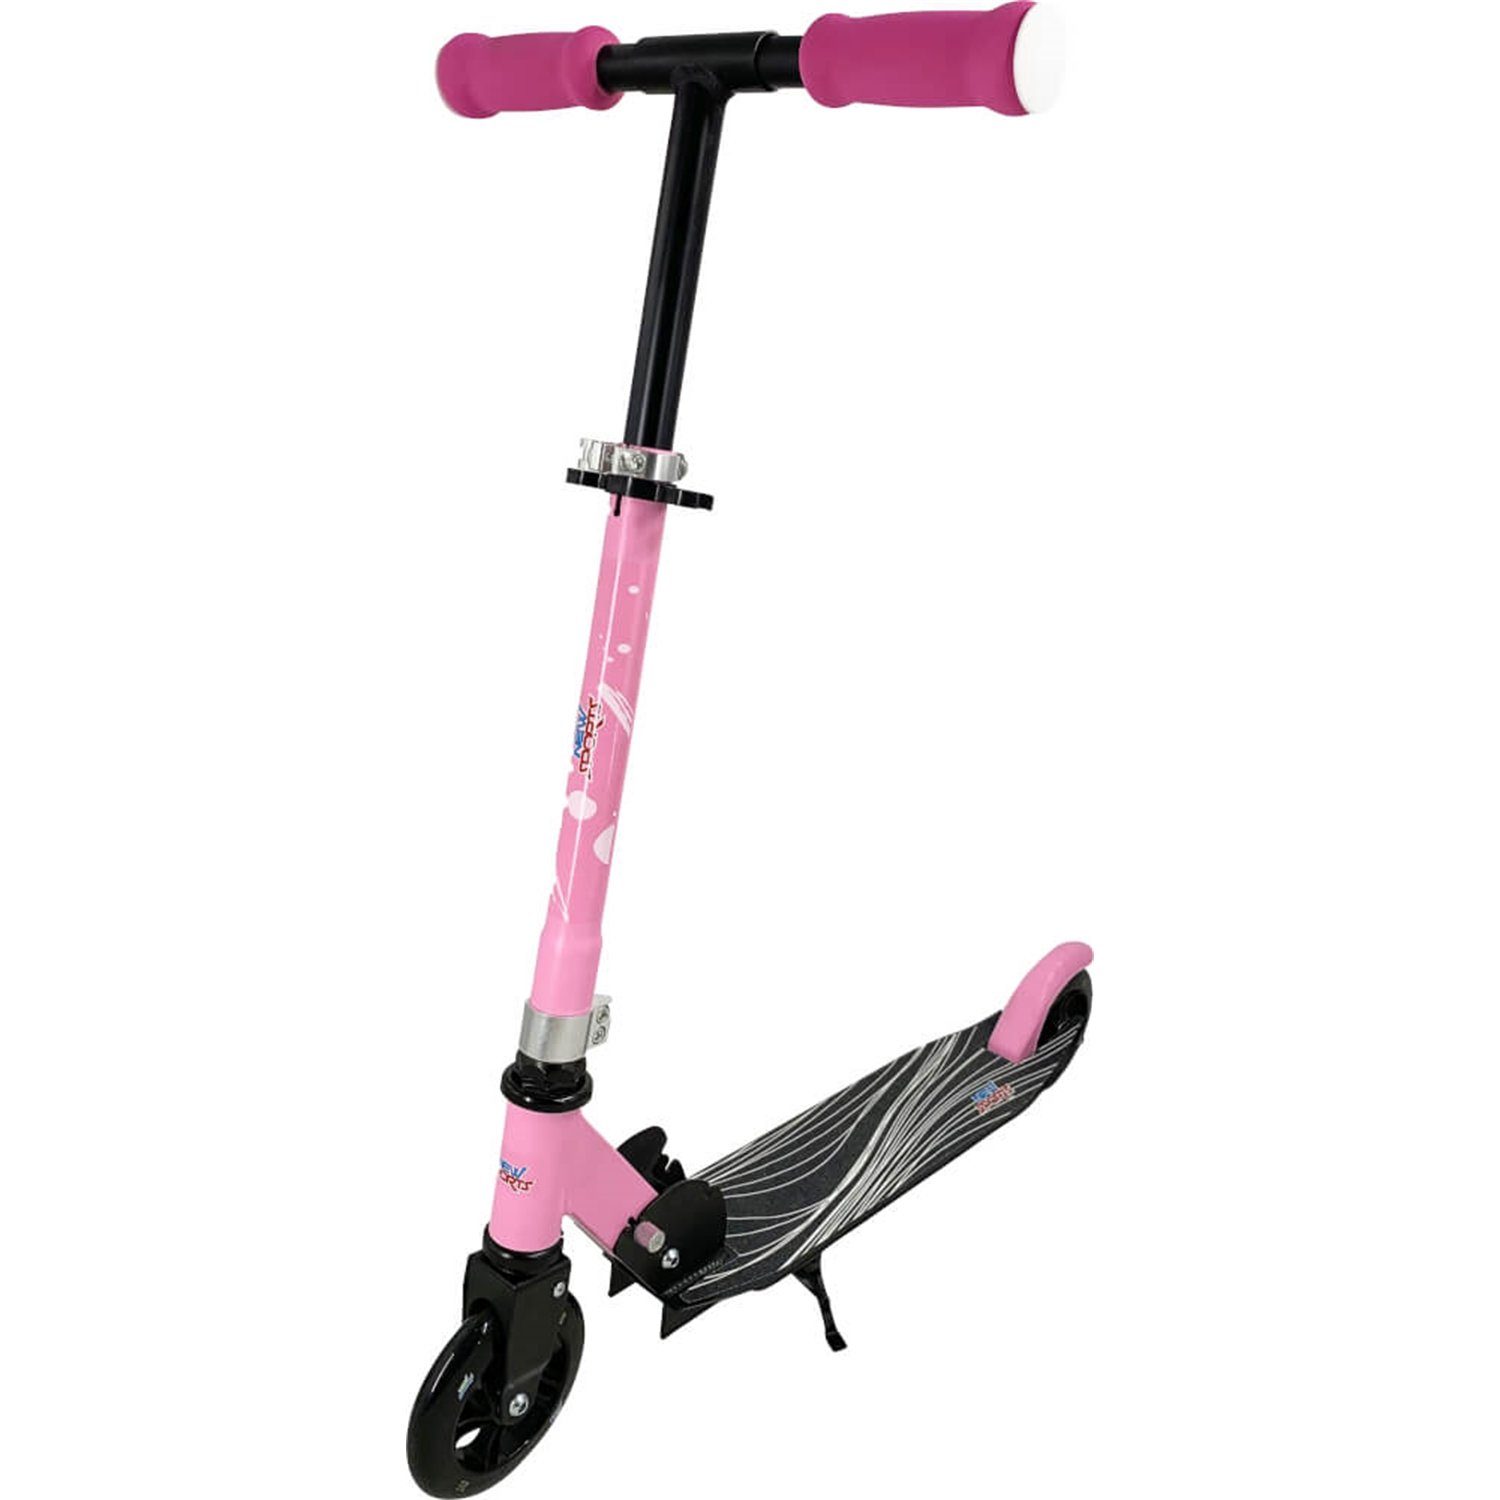 73423341 Scooter pink/weiss Scooter Vedes NSP 125mm